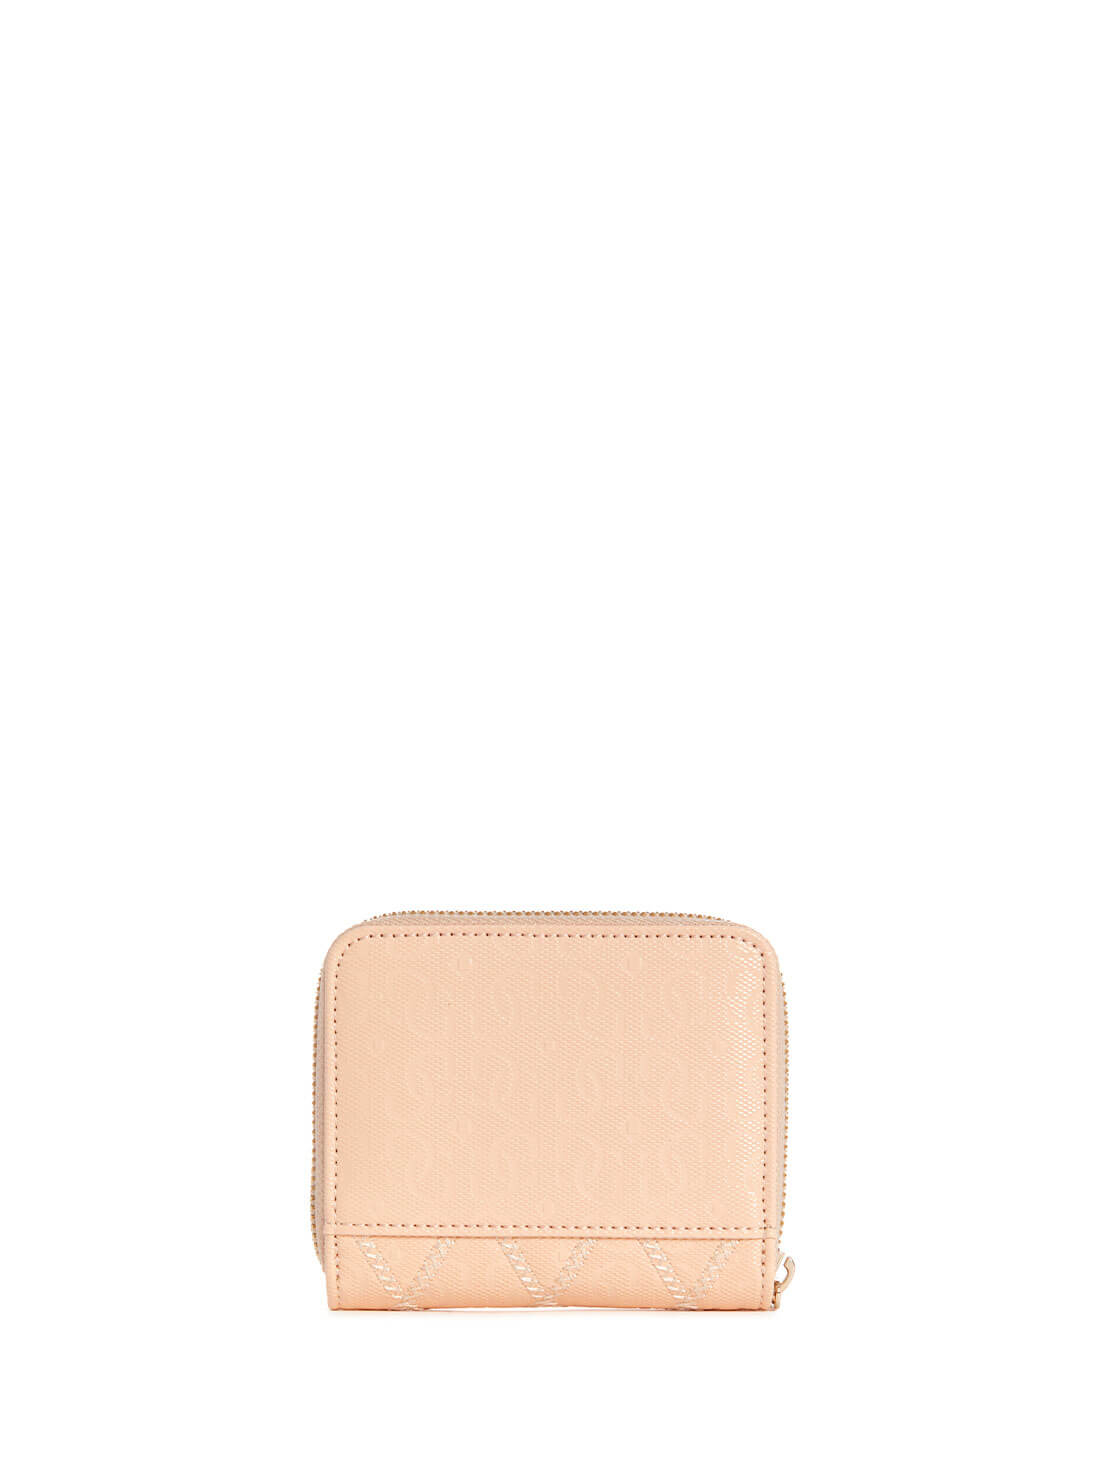 GUESS Light Peach Adi Small Wallet back view